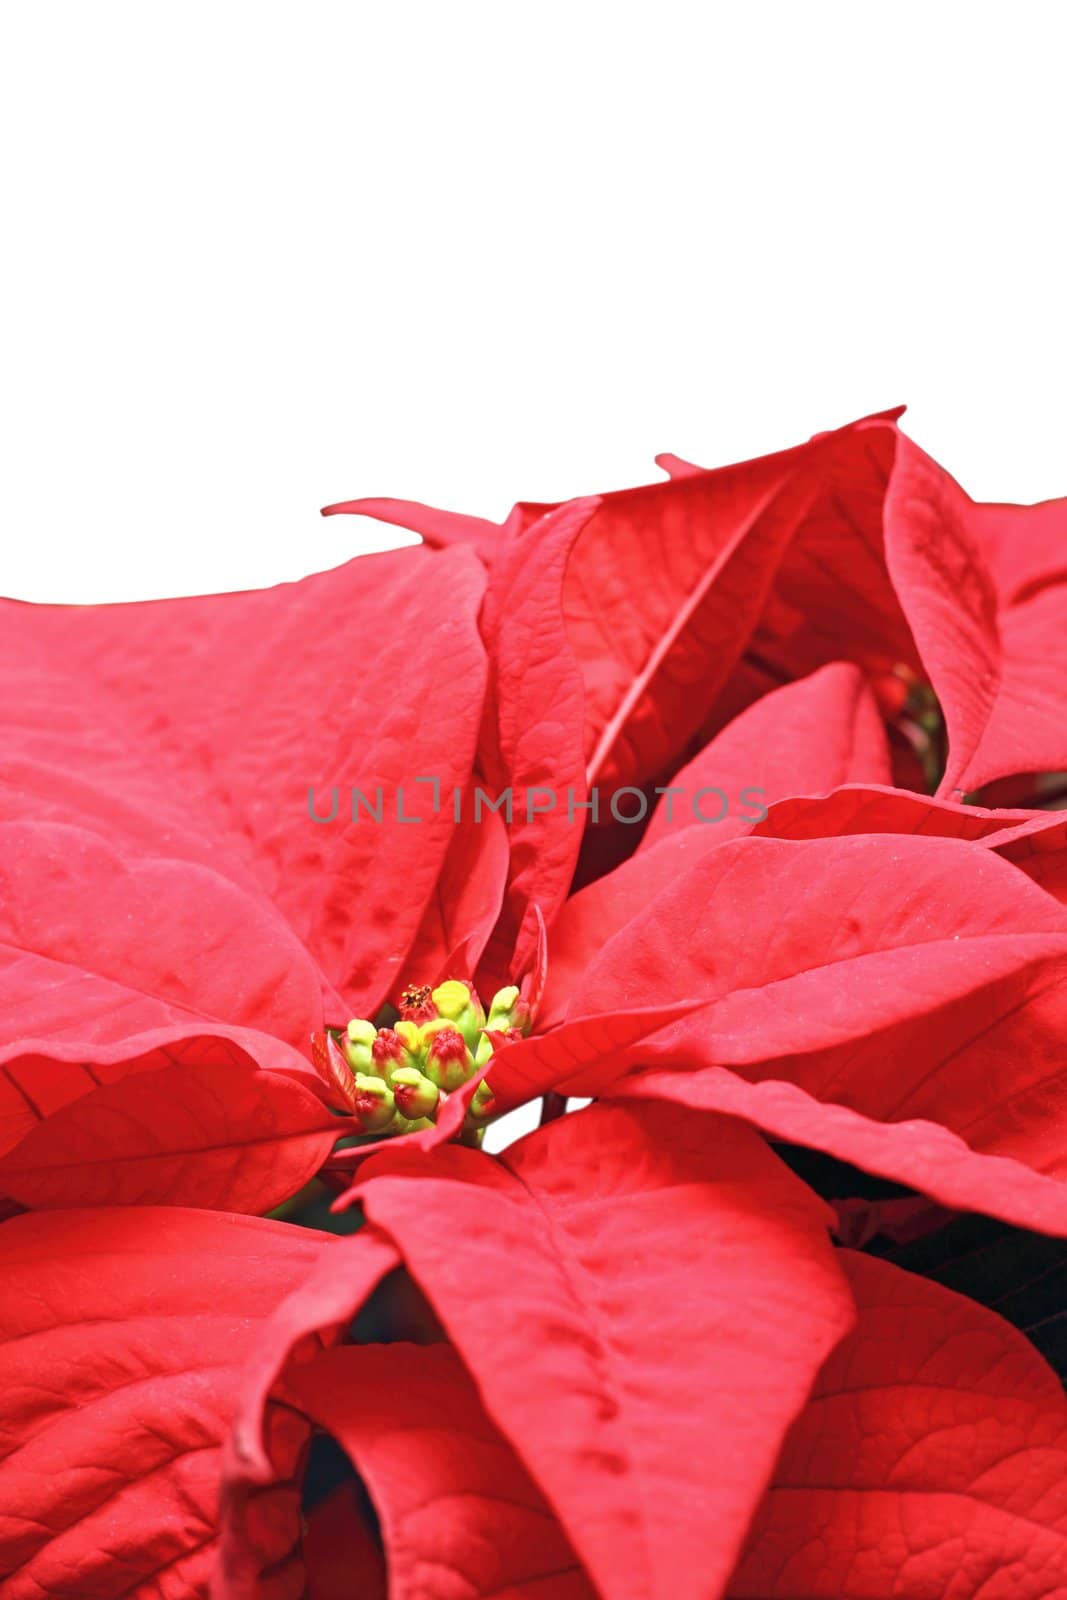 detail of poinsettia flower by taviphoto